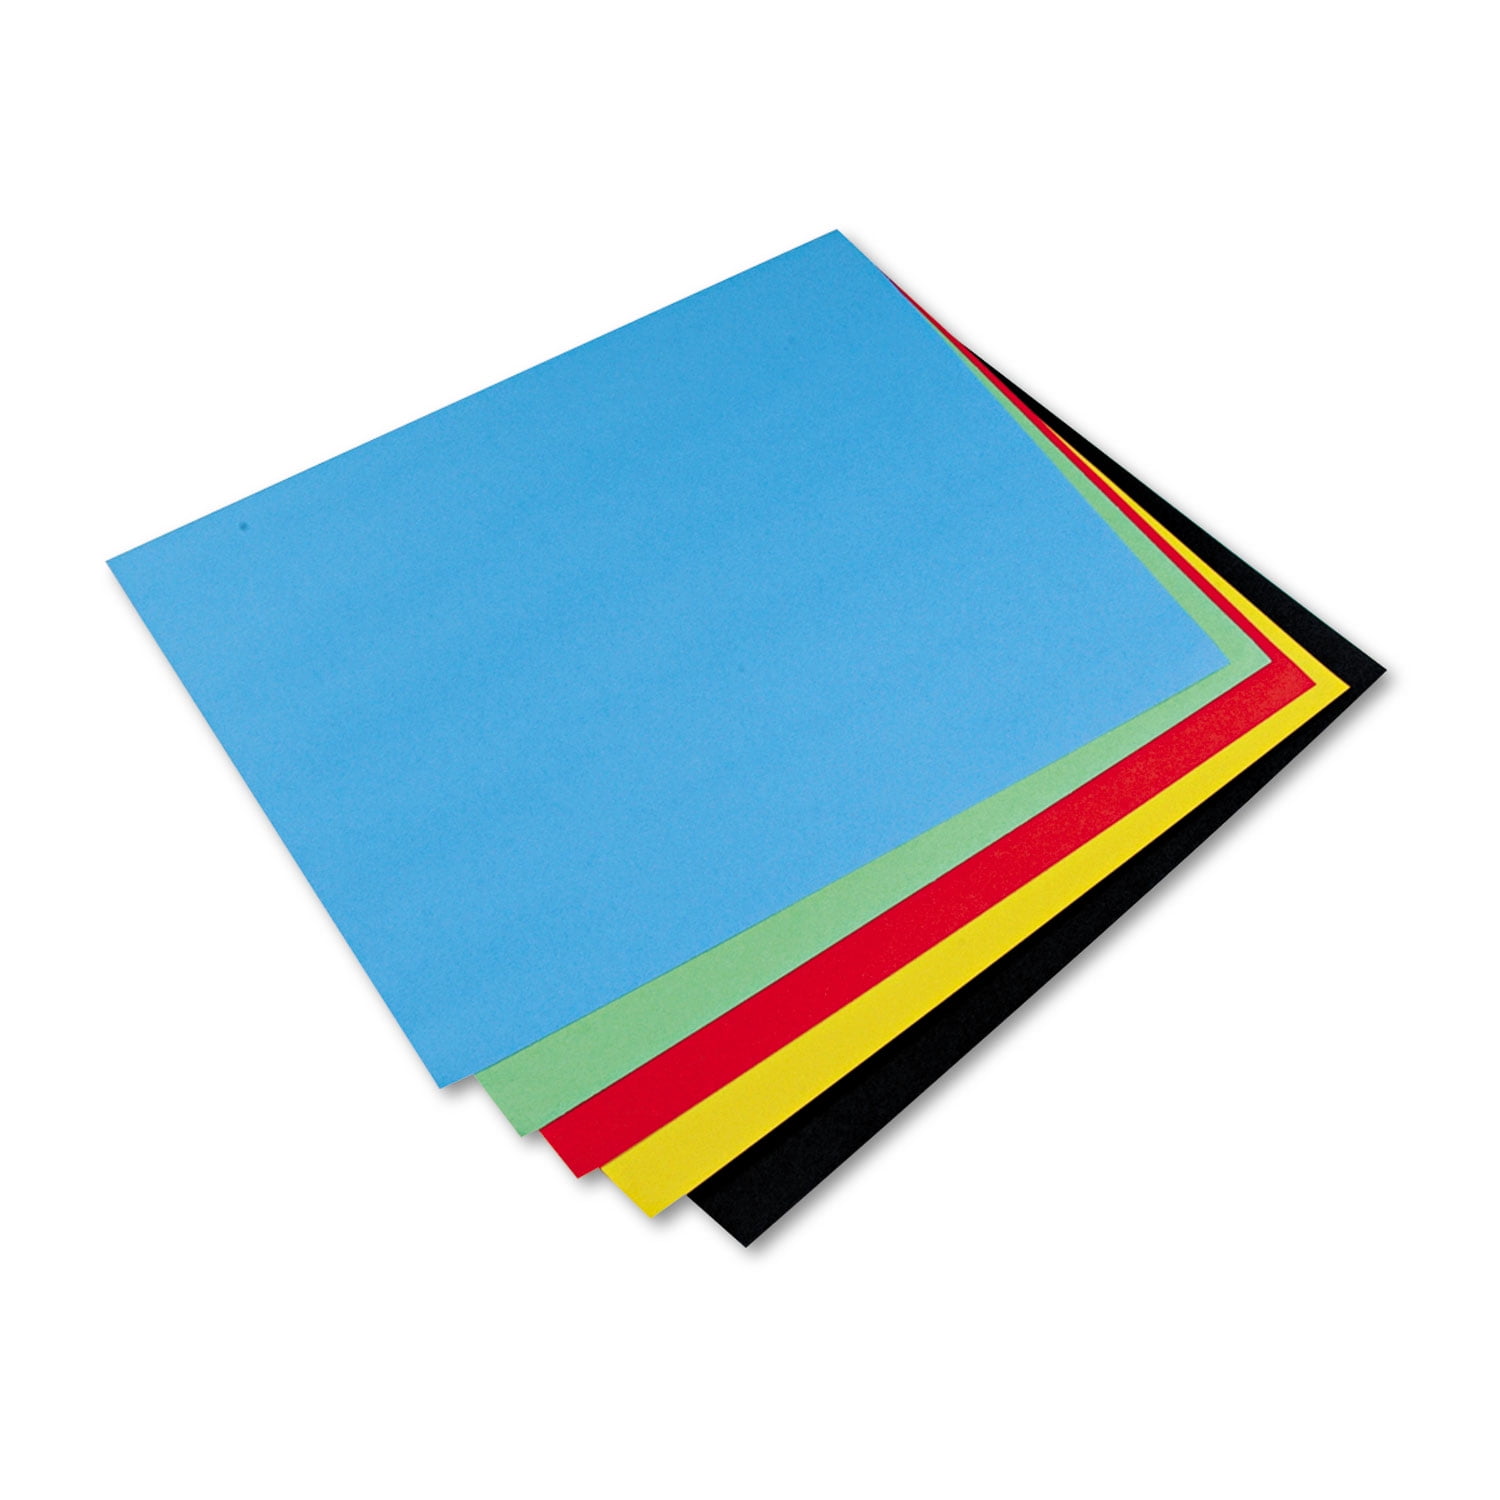 POSTER BOARD 11X14 5PK COLOR – Central Trading Company Limited